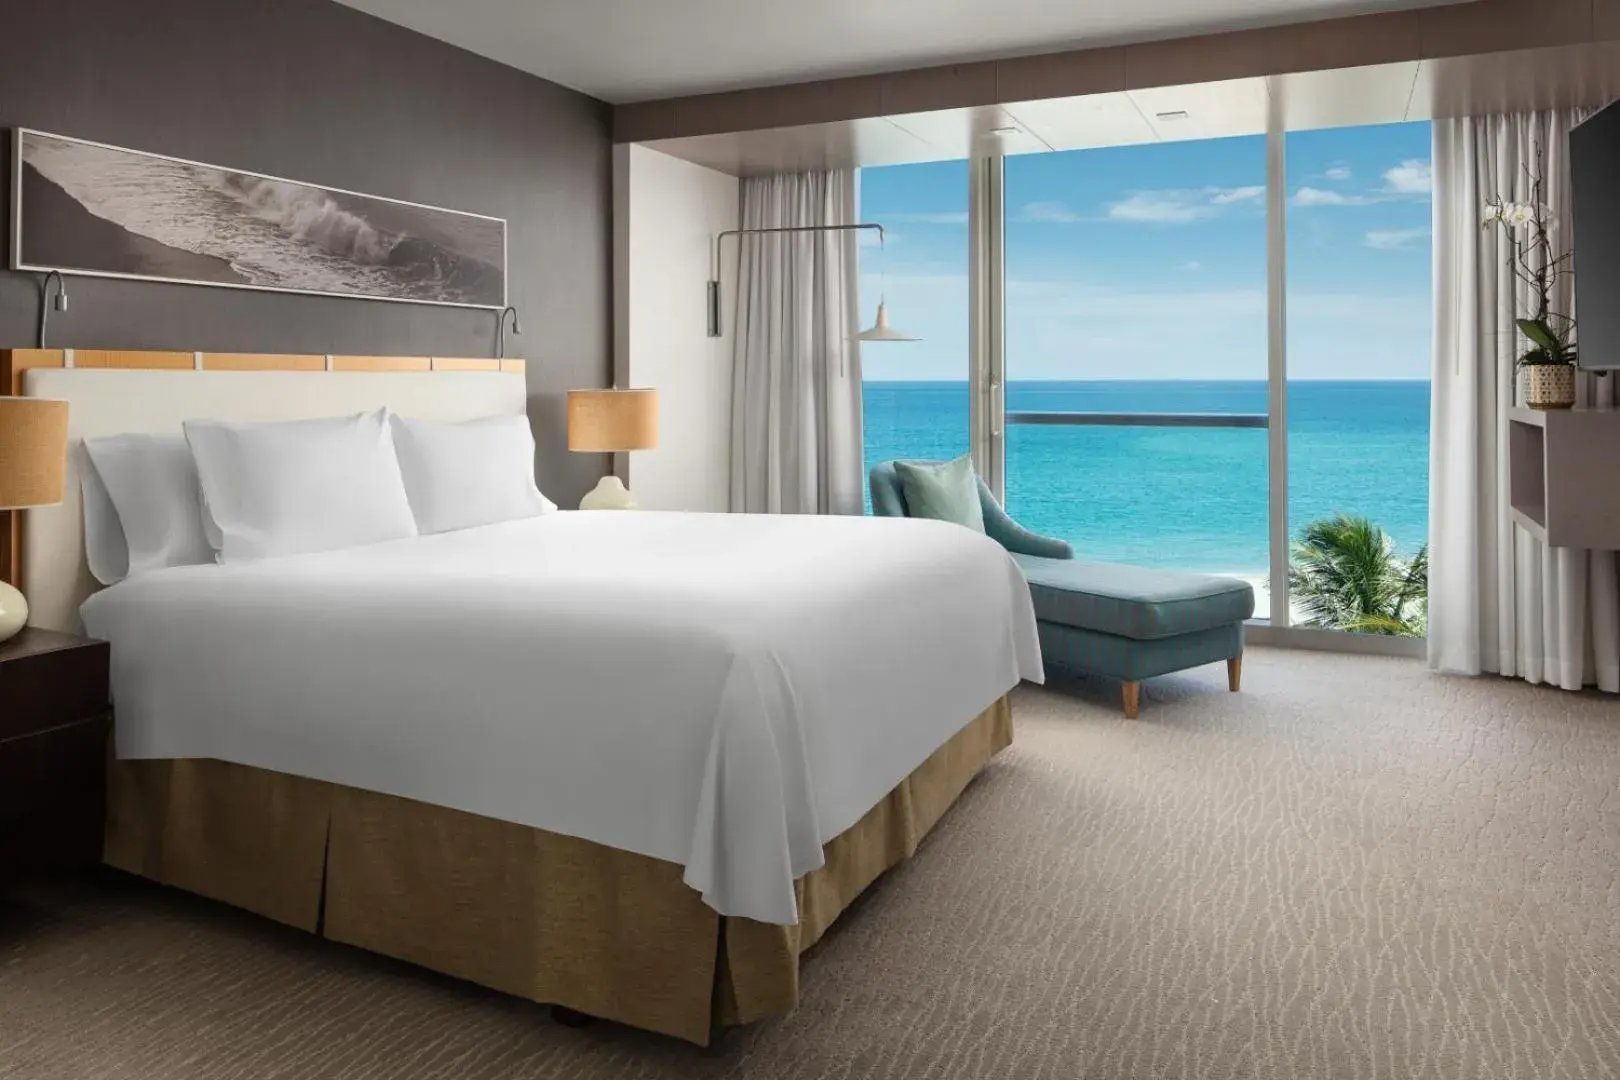 Bedroom, Sea View in Beach Club at The Boca Raton